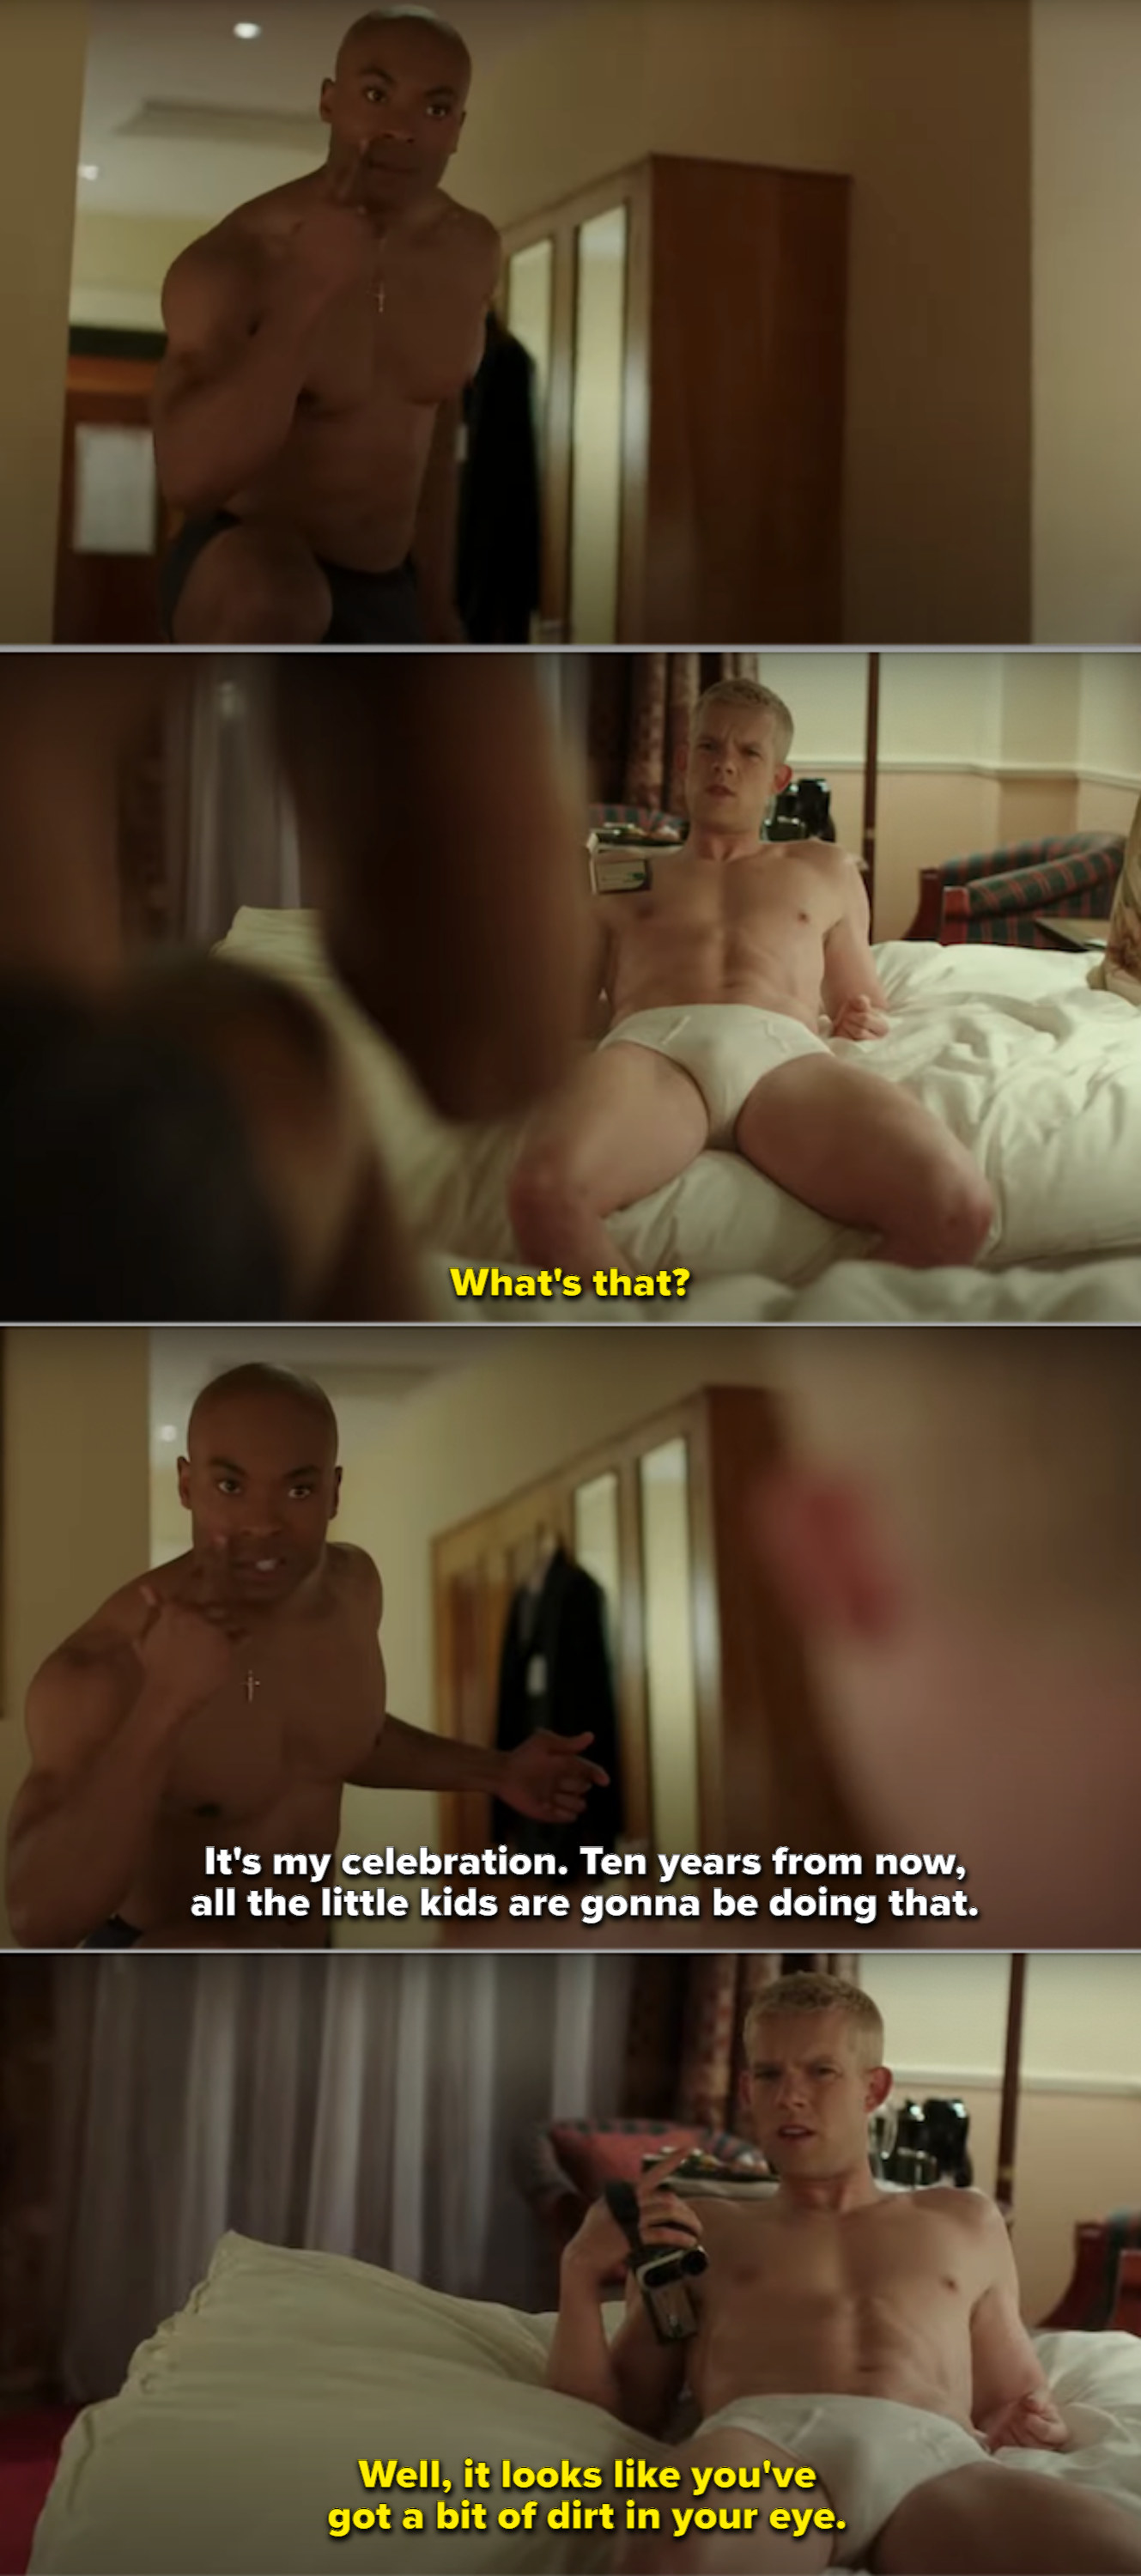 Russell and Arinzé in their hotel room, shirtless